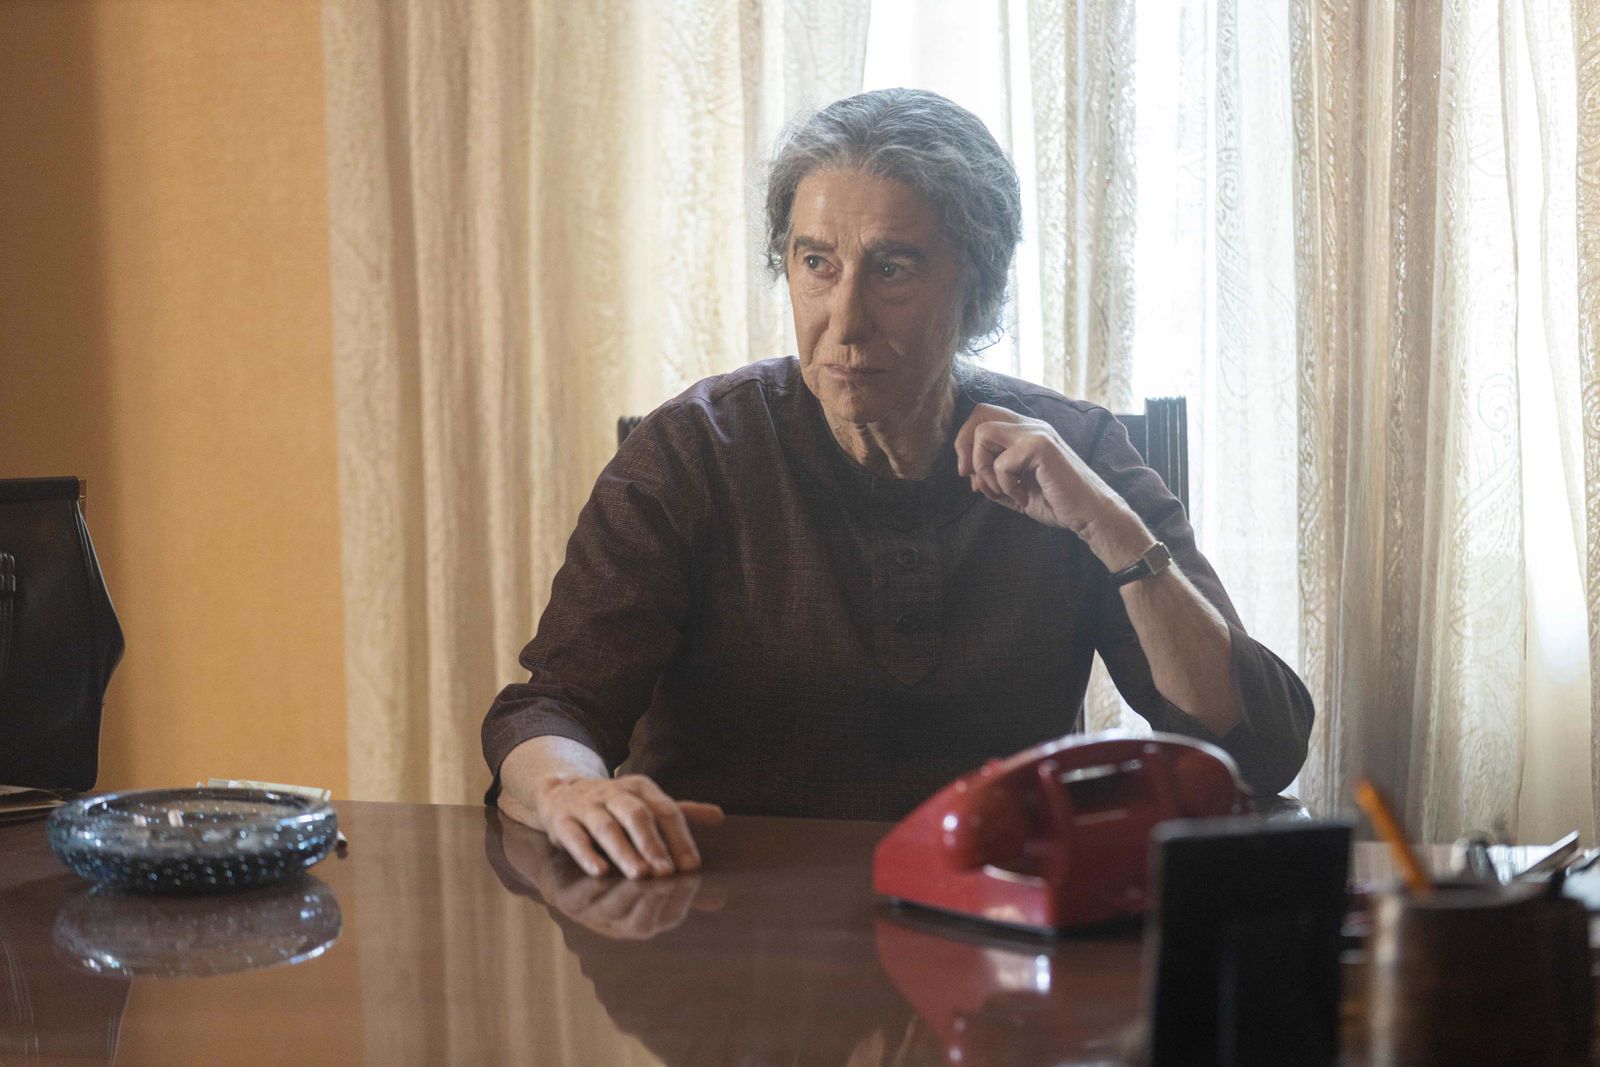 A film about Golda Meir compels Israel to look in the mirror as it